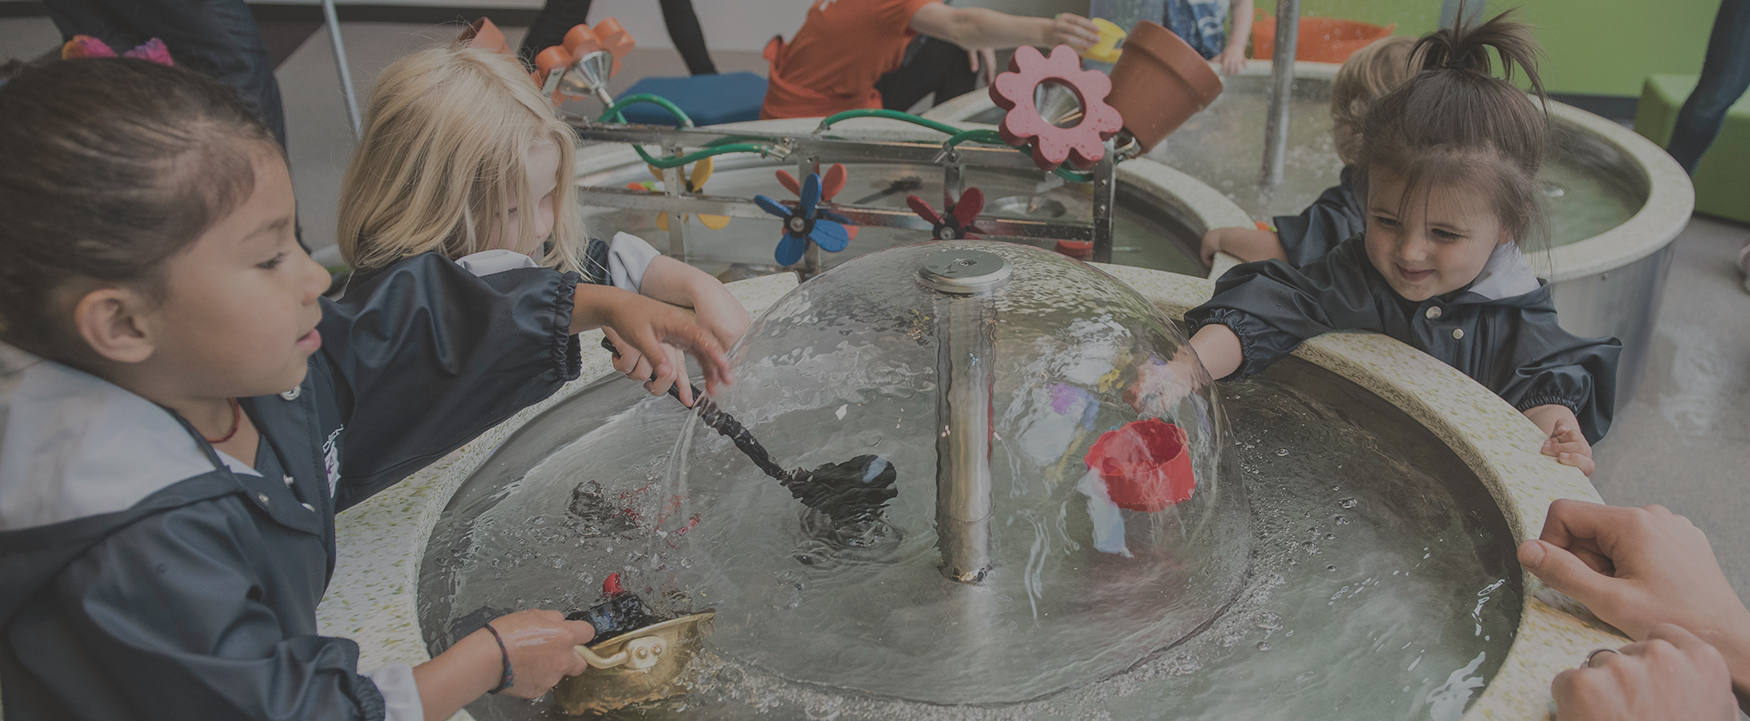 children playing with a water table